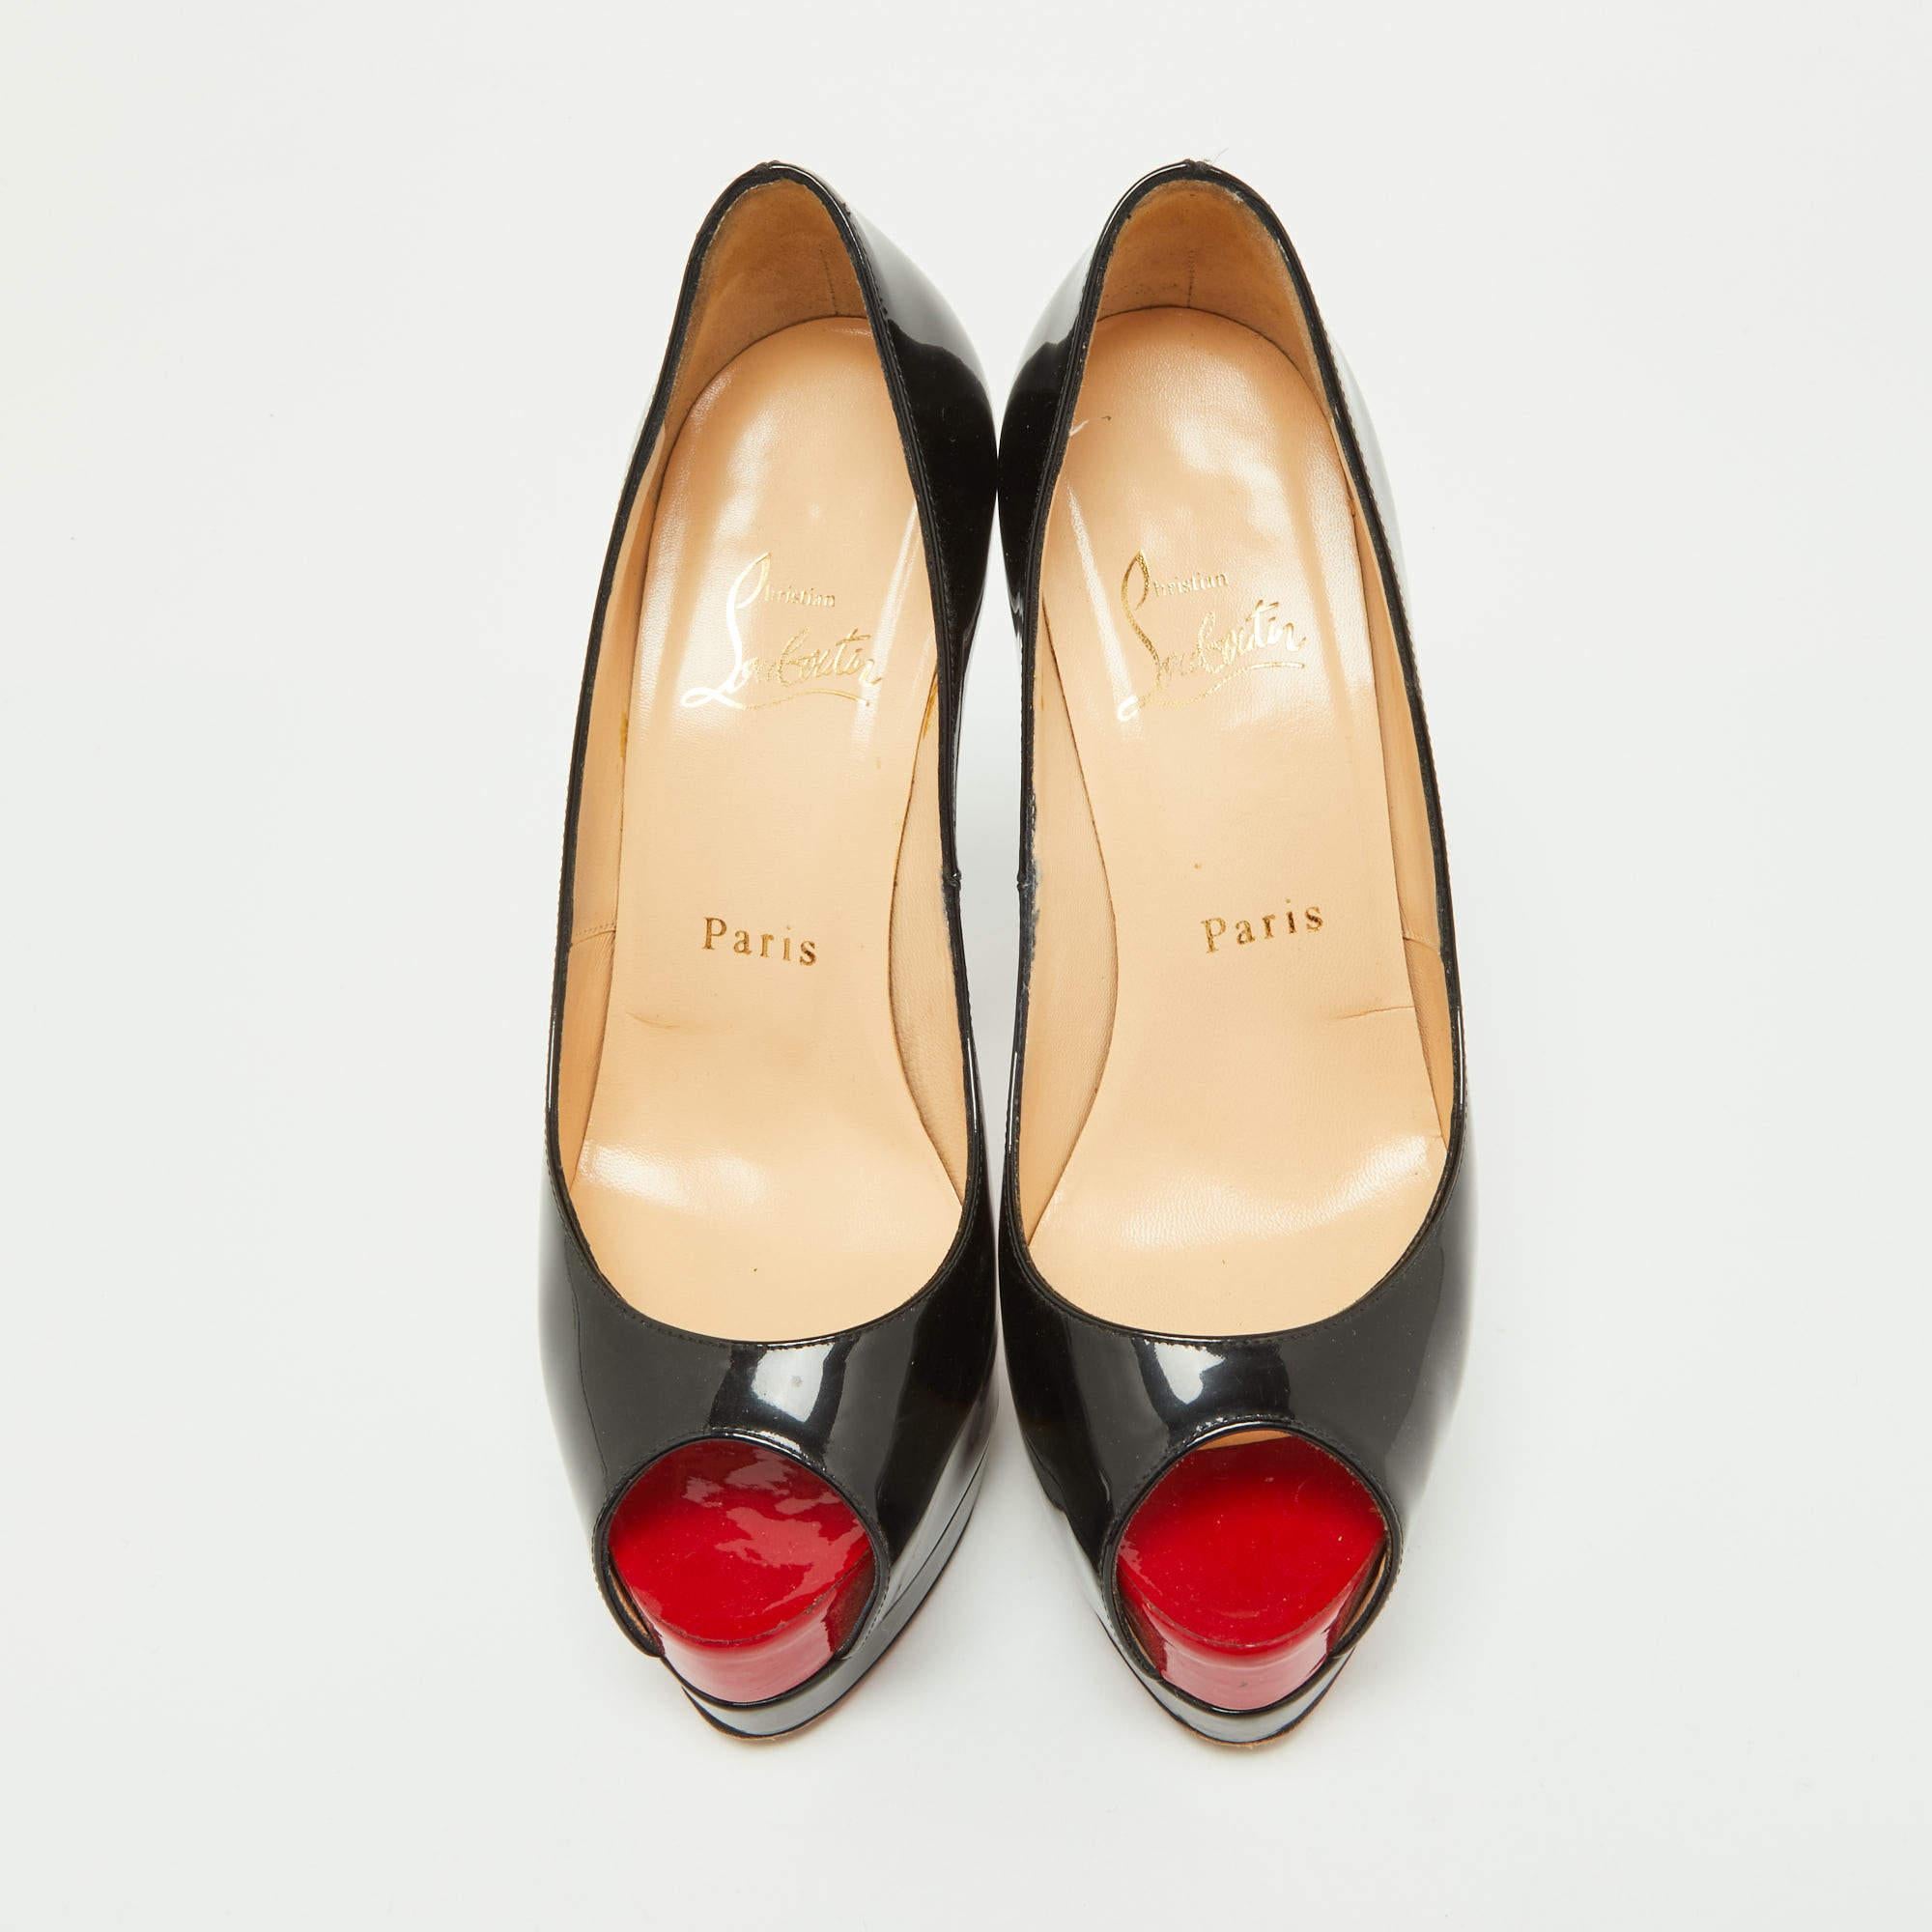 These pumps from Christian Louboutin are meant to be a loved choice. Wonderfully crafted and balanced on sleek heels, the pumps will lift your feet in a stunning silhouette.

Includes:  Extra Heel Tips